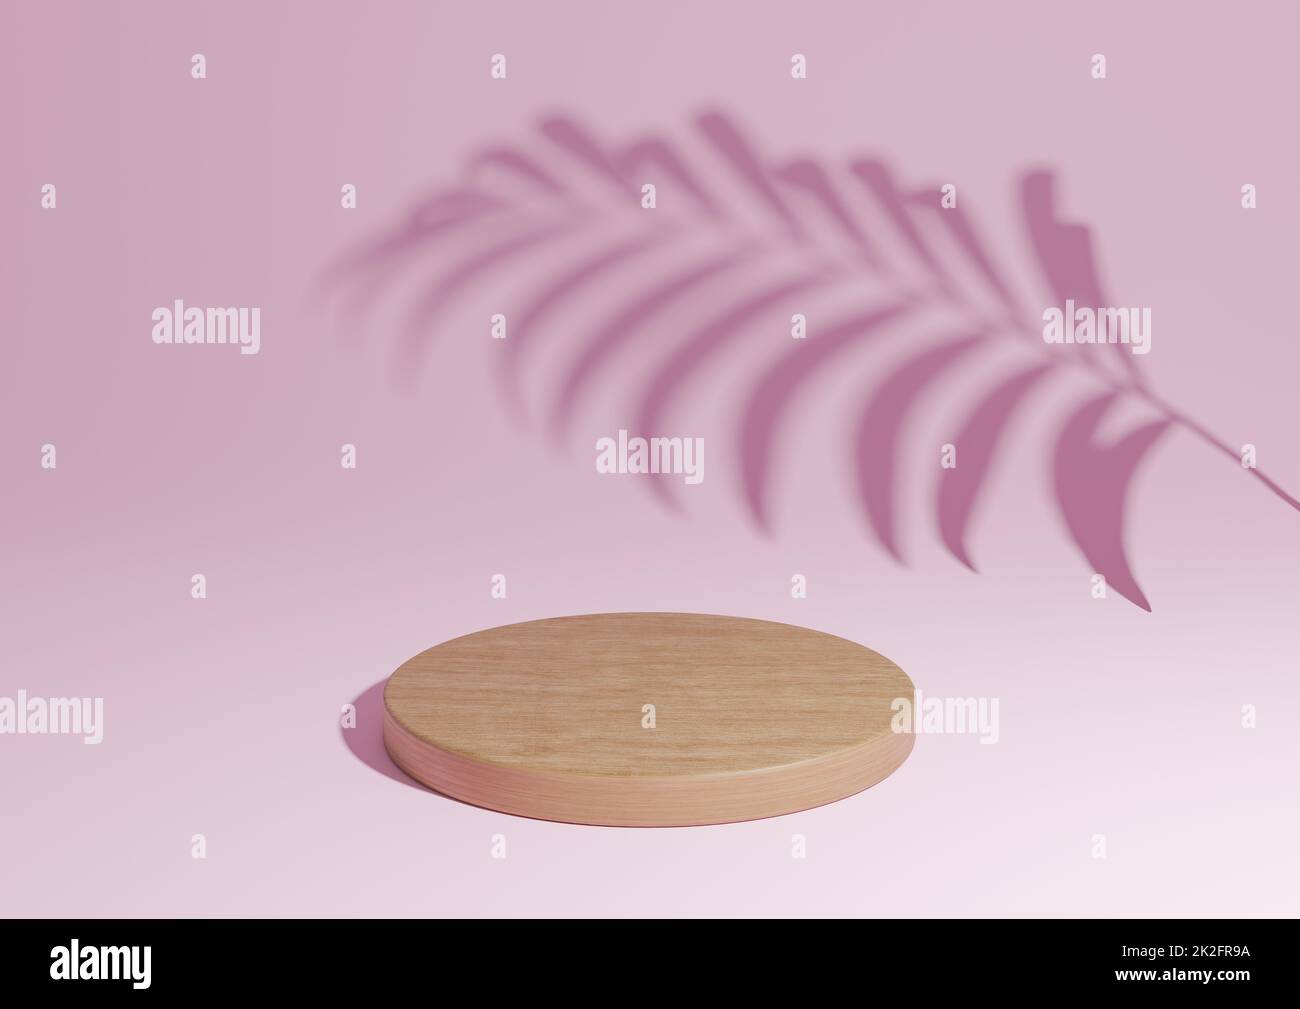 Light, pastel, lavender pink simple 3D render minimal natural product display composition with one wood podium or stand with palm leaf shadow in the background Stock Photo